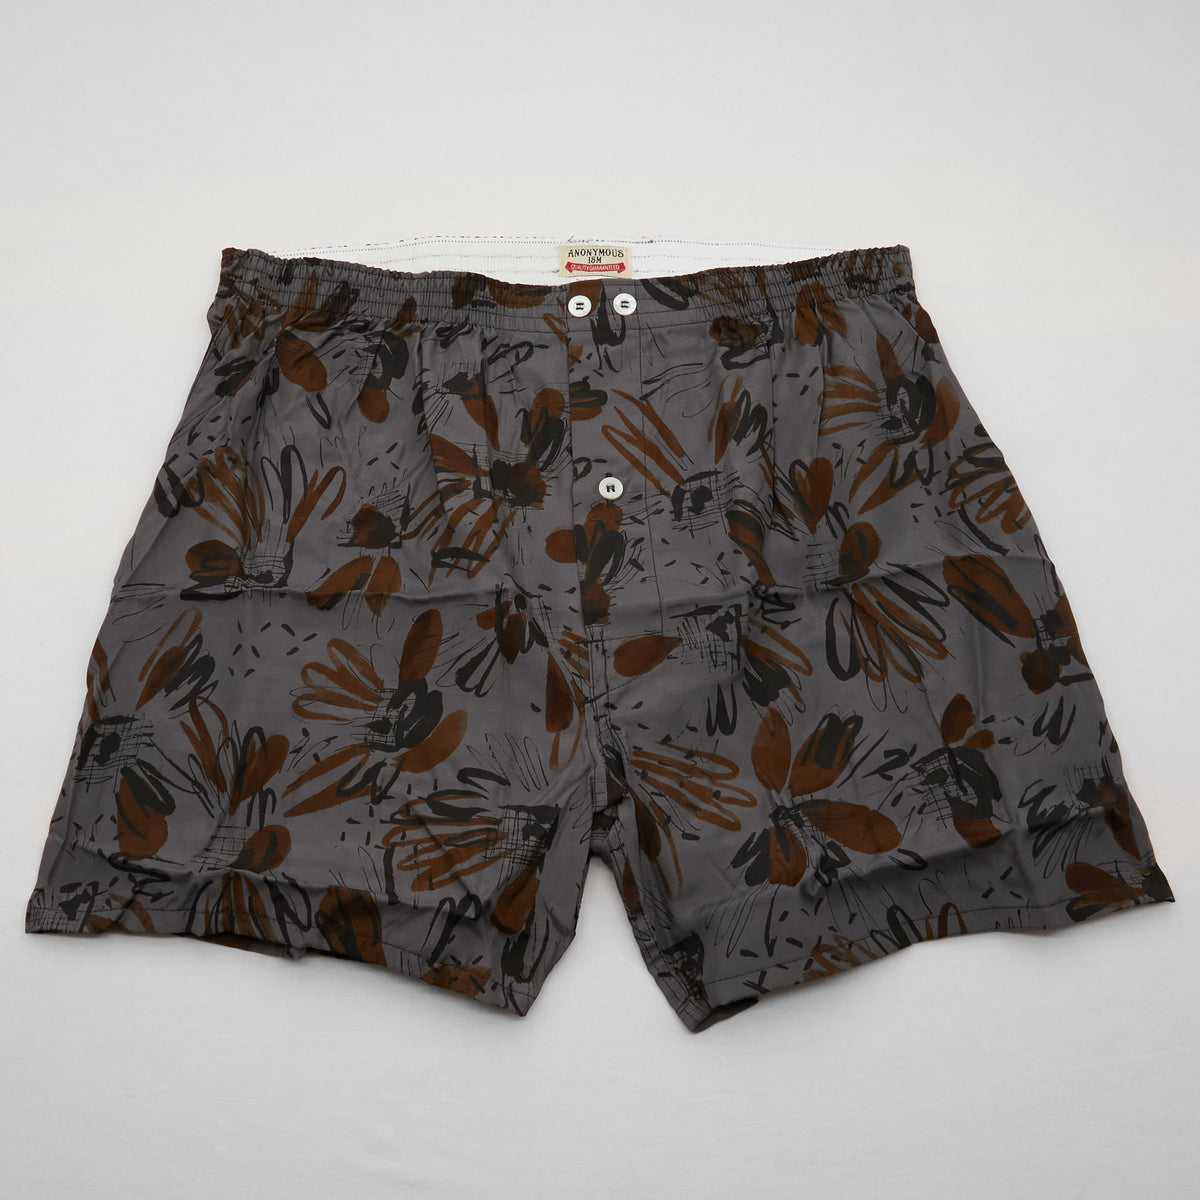 Anonymous Ism Rayon Hand Paint Boxers